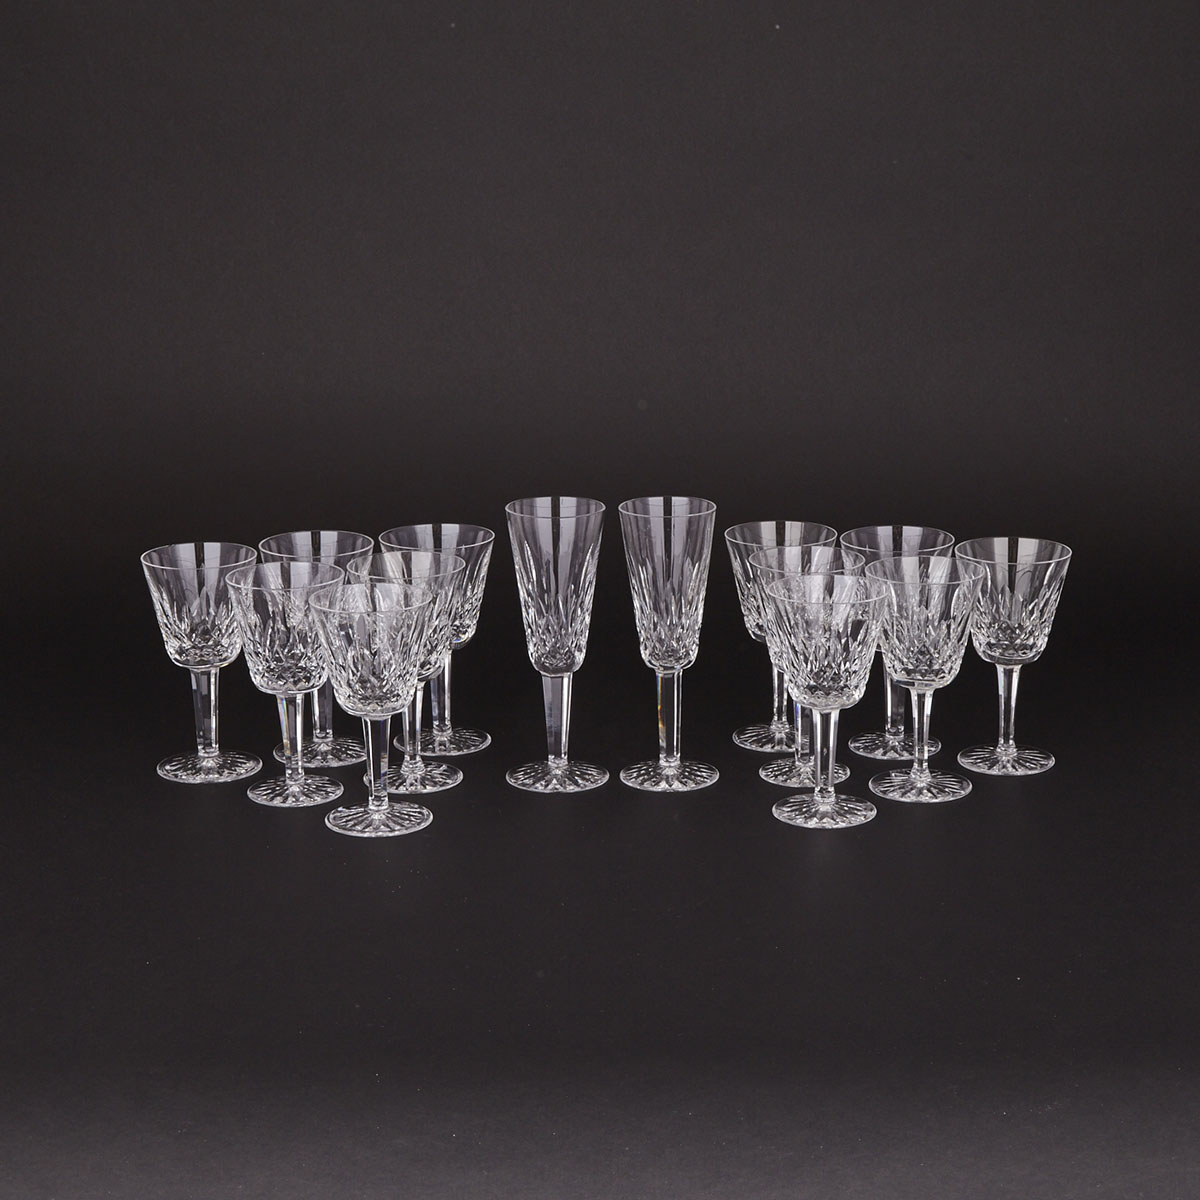 Twelve Waterford ‘Lismore’ Pattern Cut Glass Wine Goblets and Two Champagne Flutes, 20th century